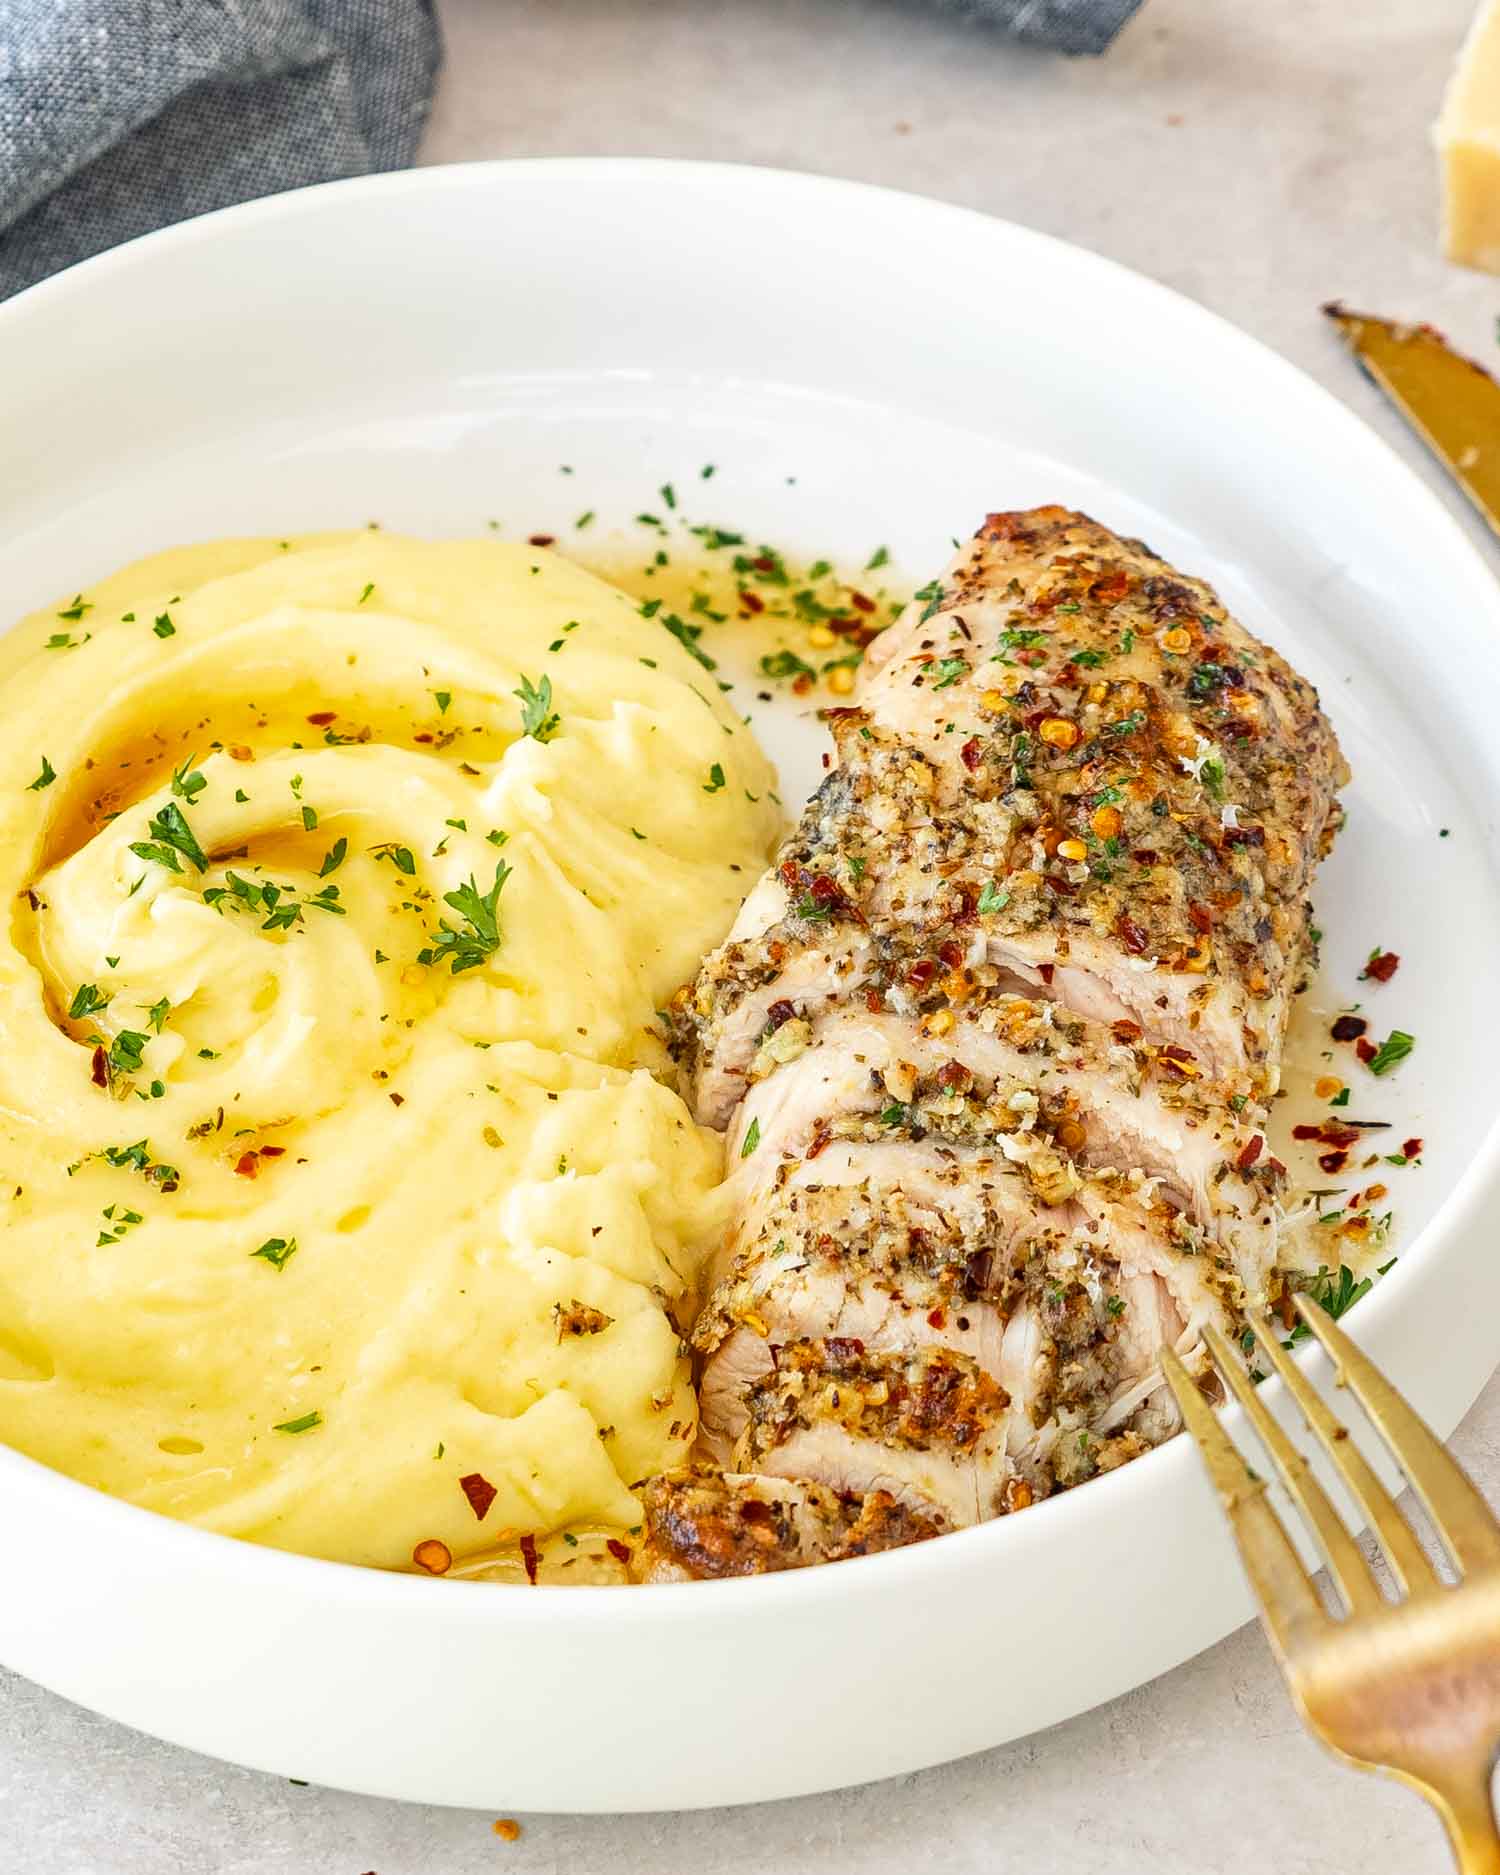 a parmesan herb chicken breast on a plate with mashed potatoes garnished with parsley.